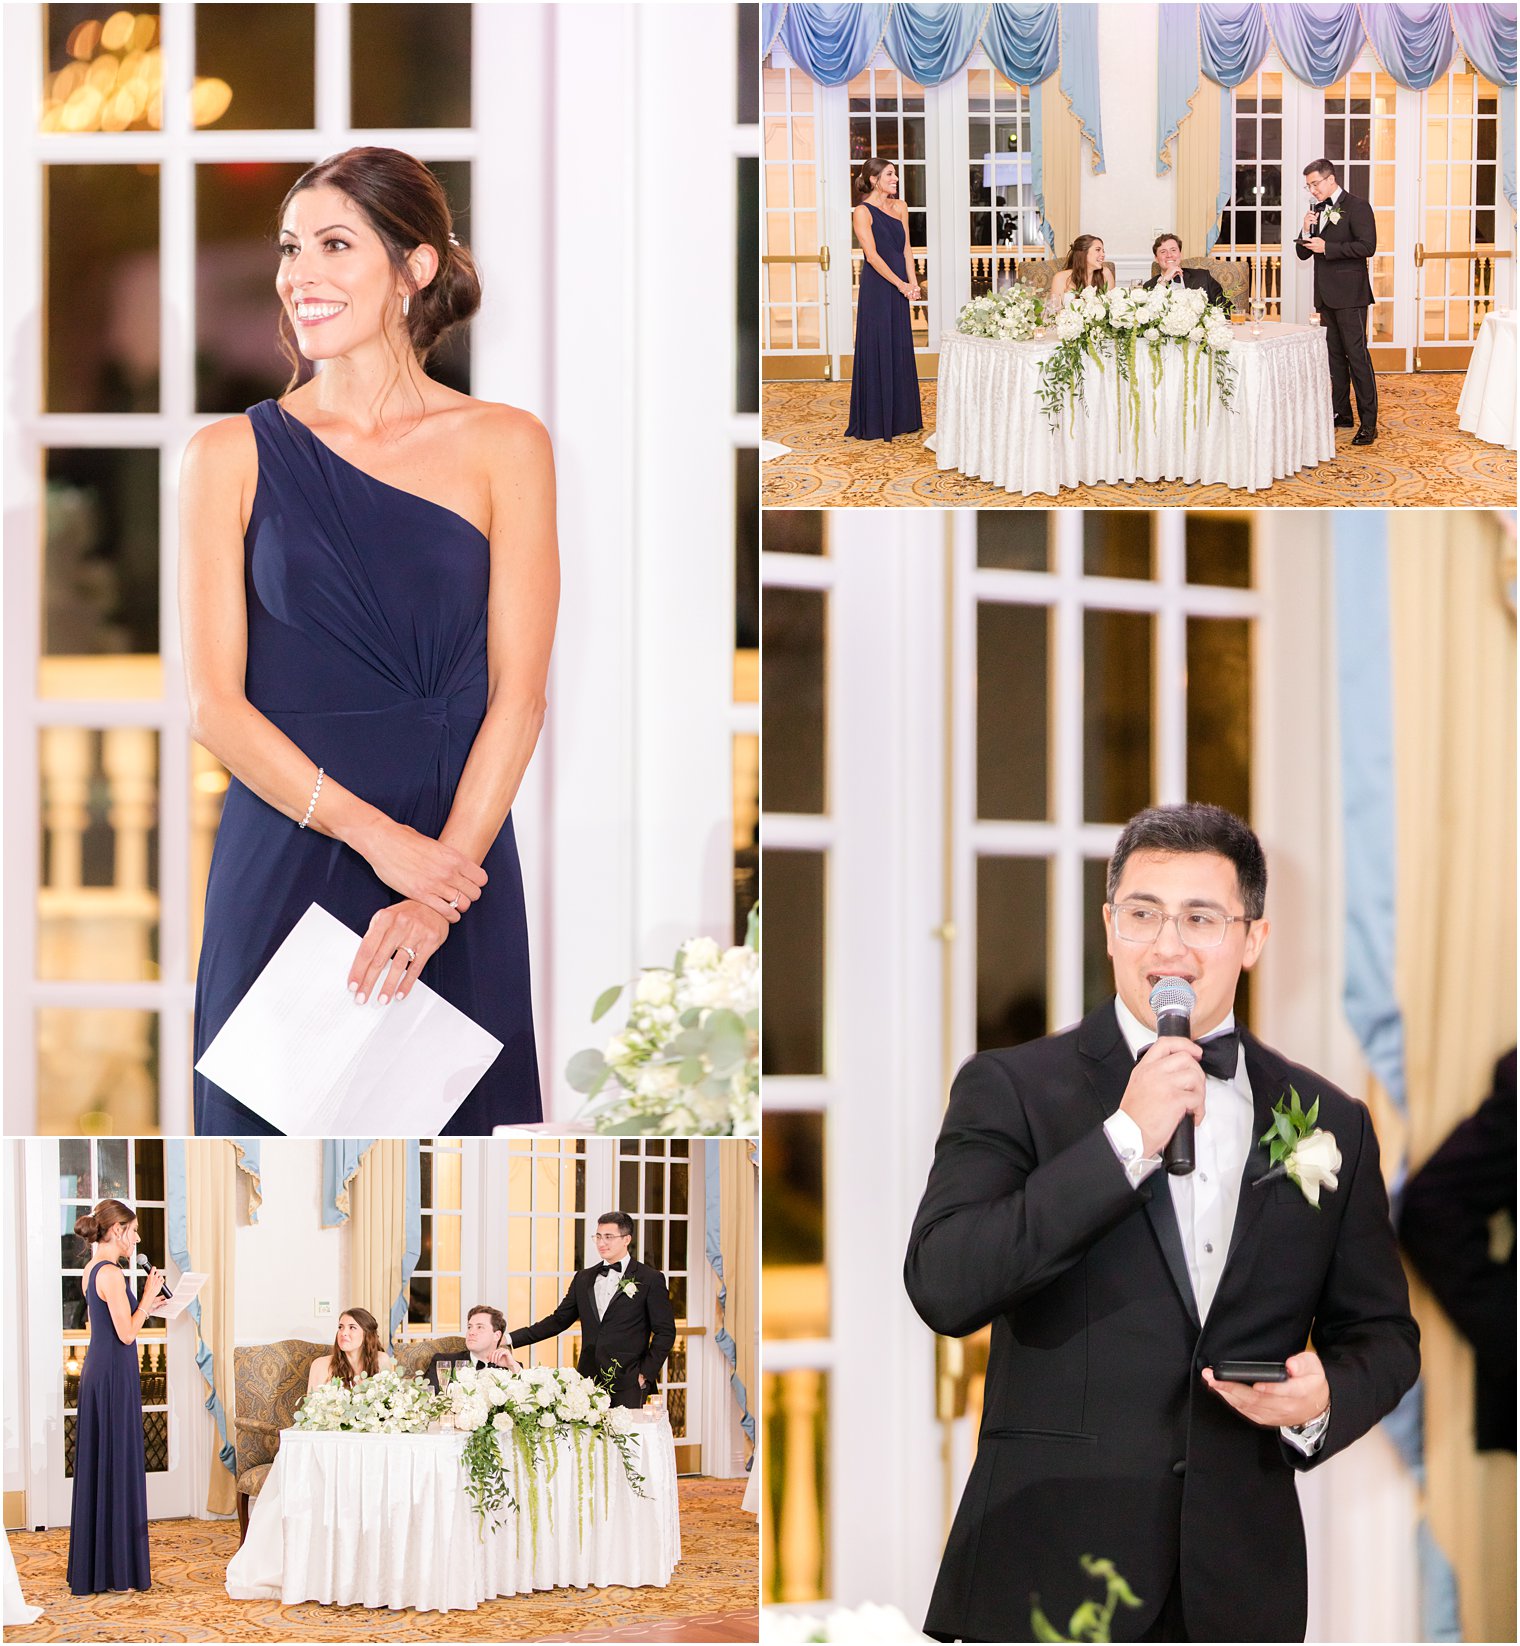 speeches for bride and groom during Farmingdale NJ wedding reception